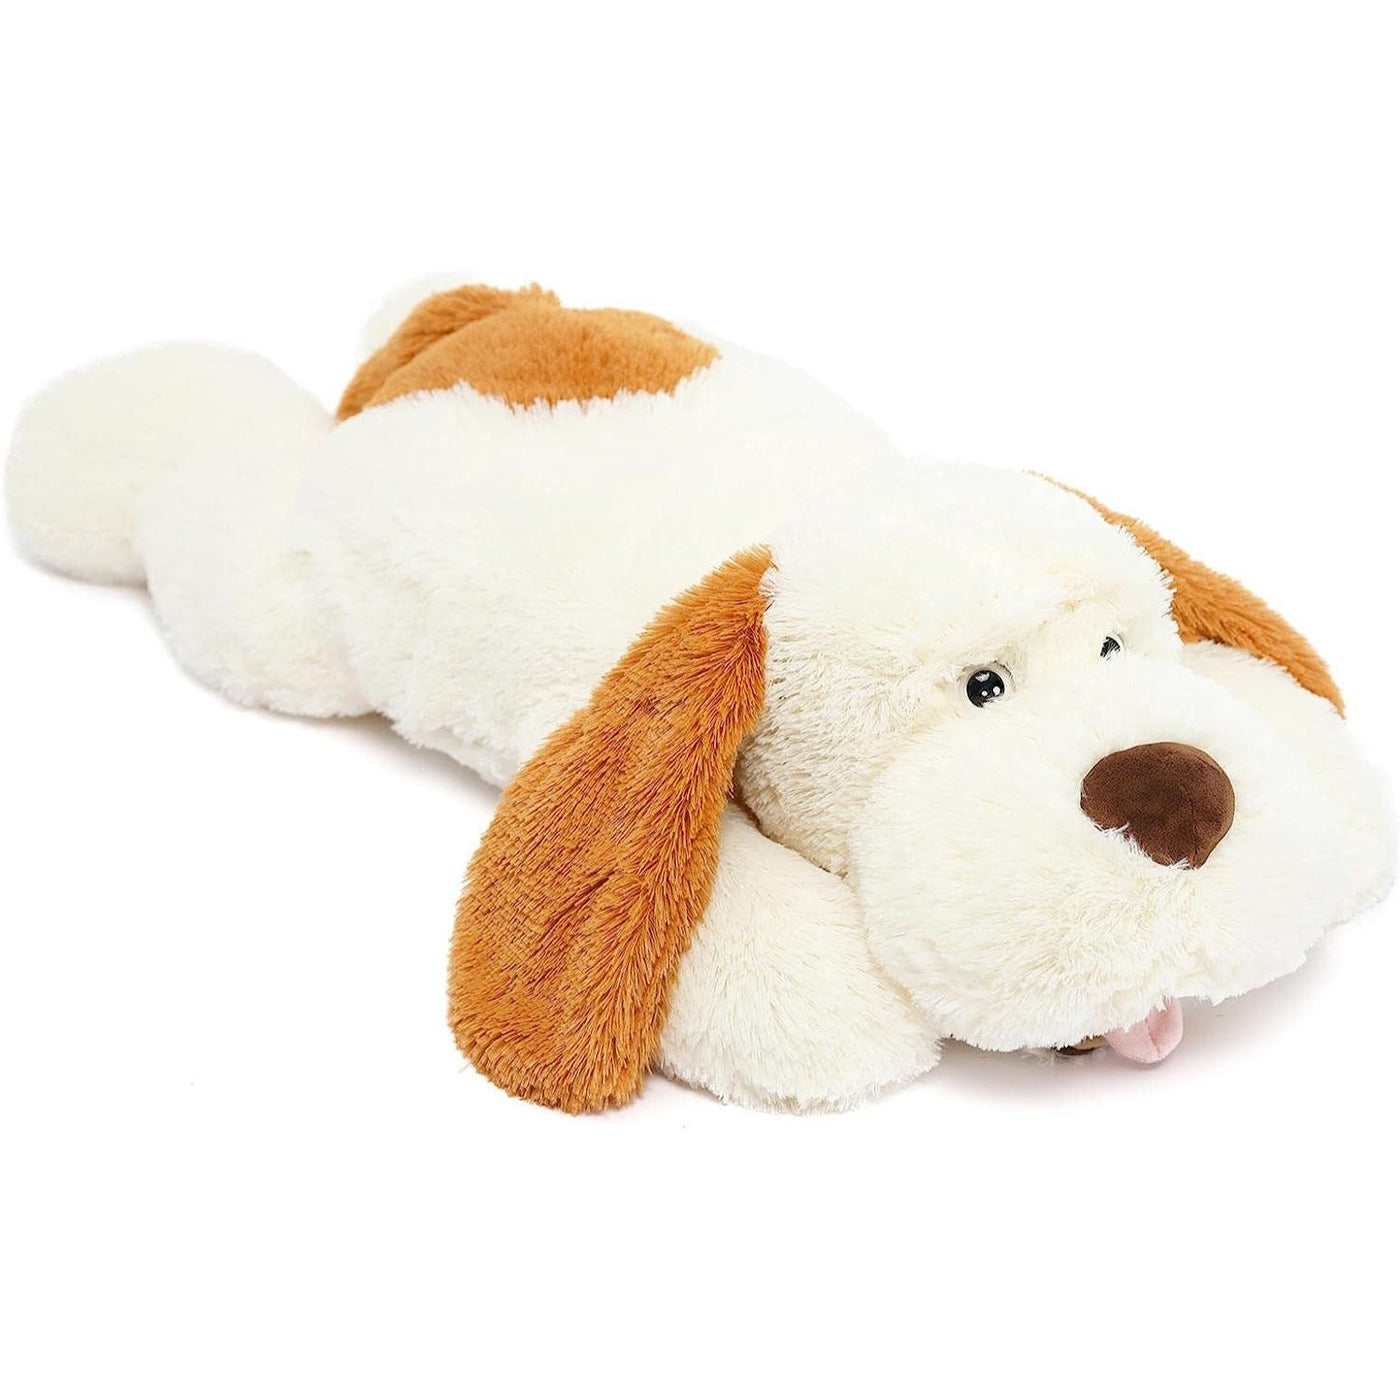 Giant Dog Stuffed Plush Toy, Brown/White/Pink, 31/51 Inches